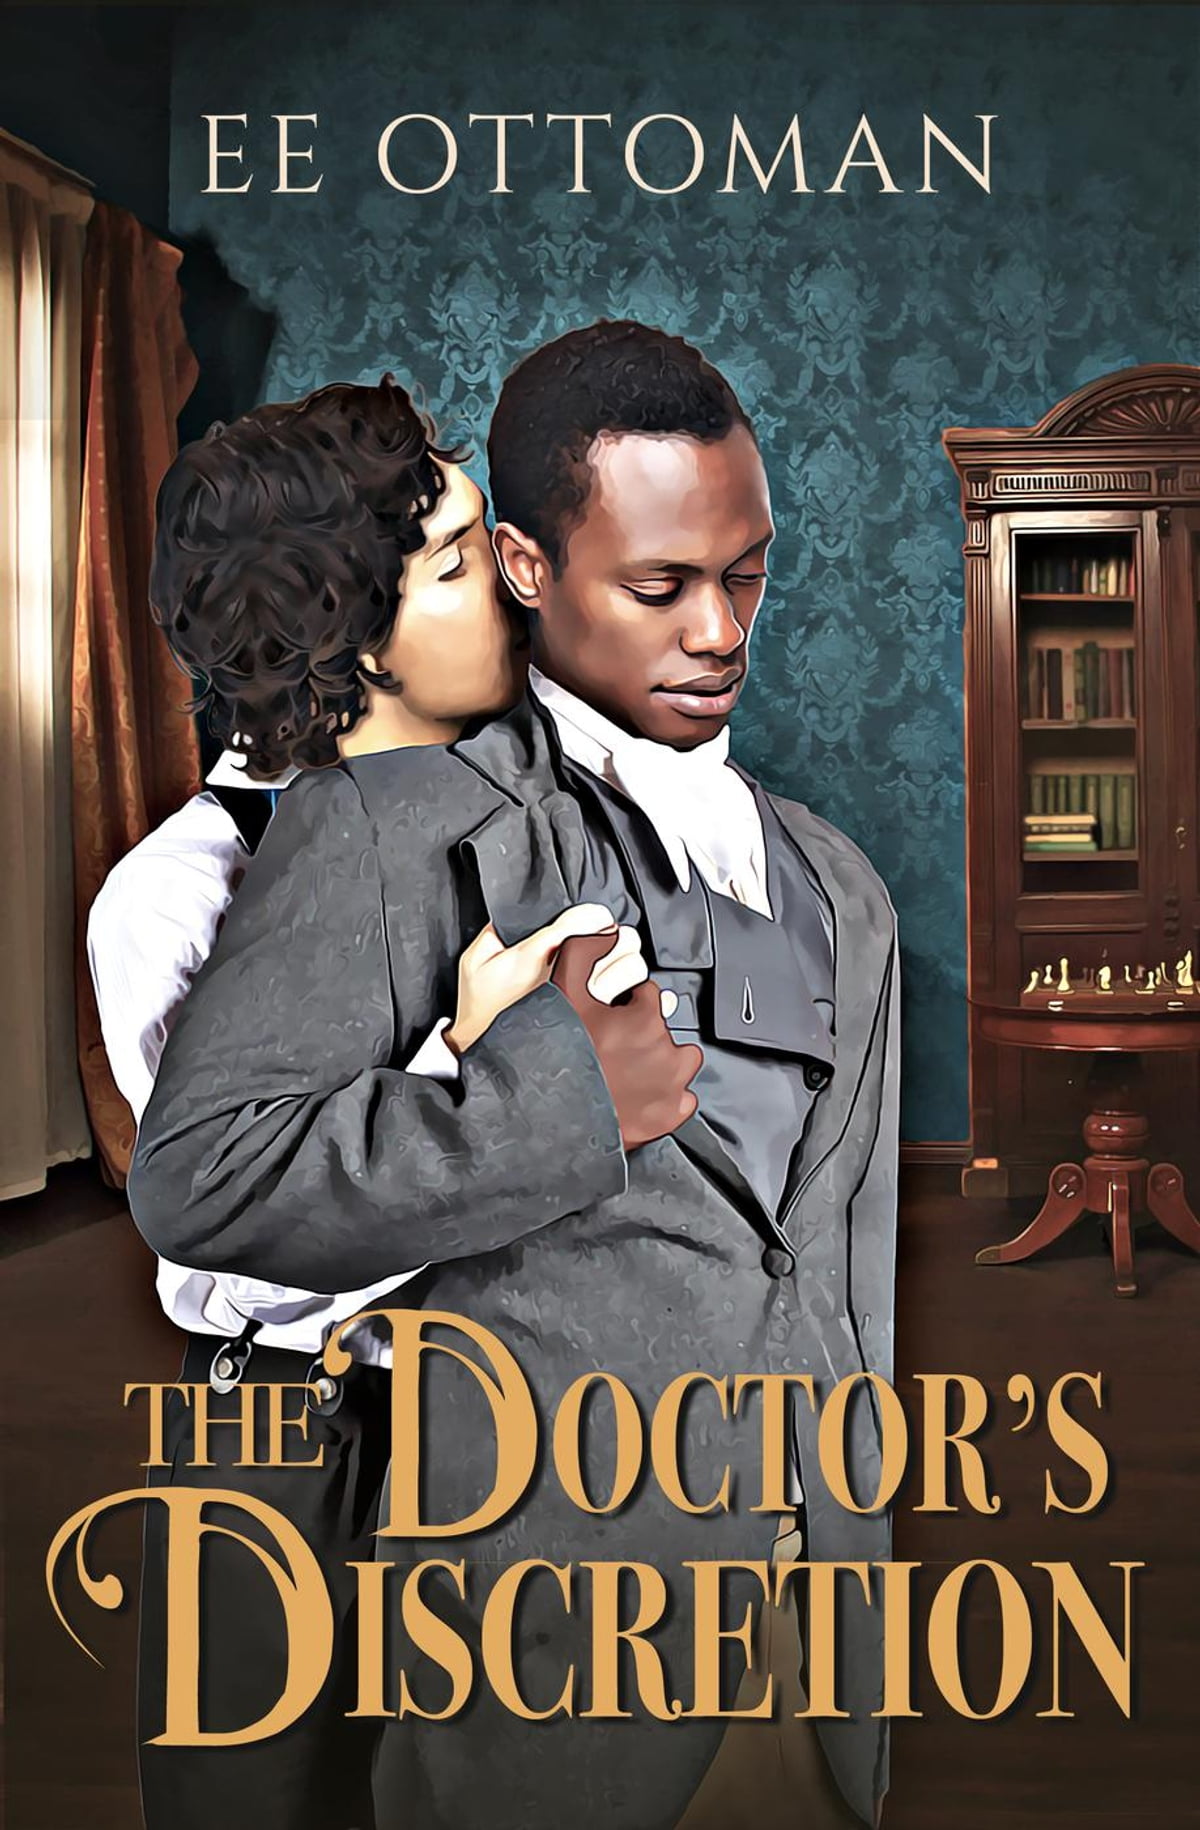 The Doctors Discretion by EE Ottoman